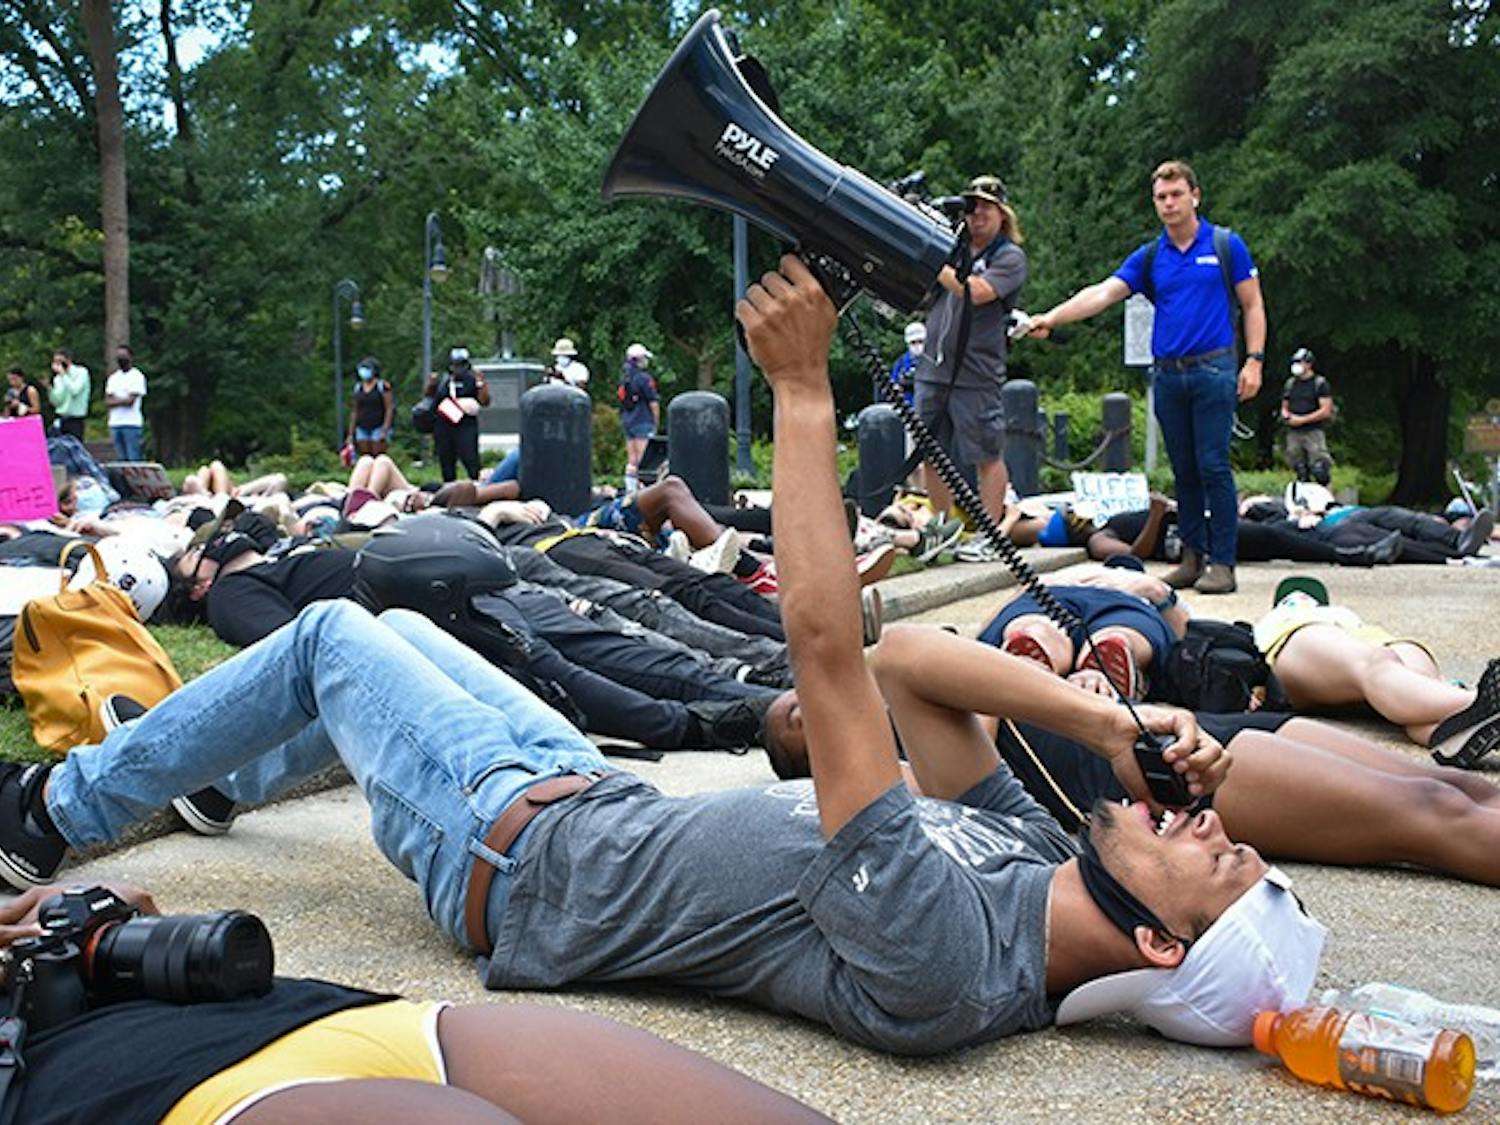 Protest organizer Lawrence Nathaniel holds a megaphone as he leads the "Die-In" on Monday in front of the Statehouse.